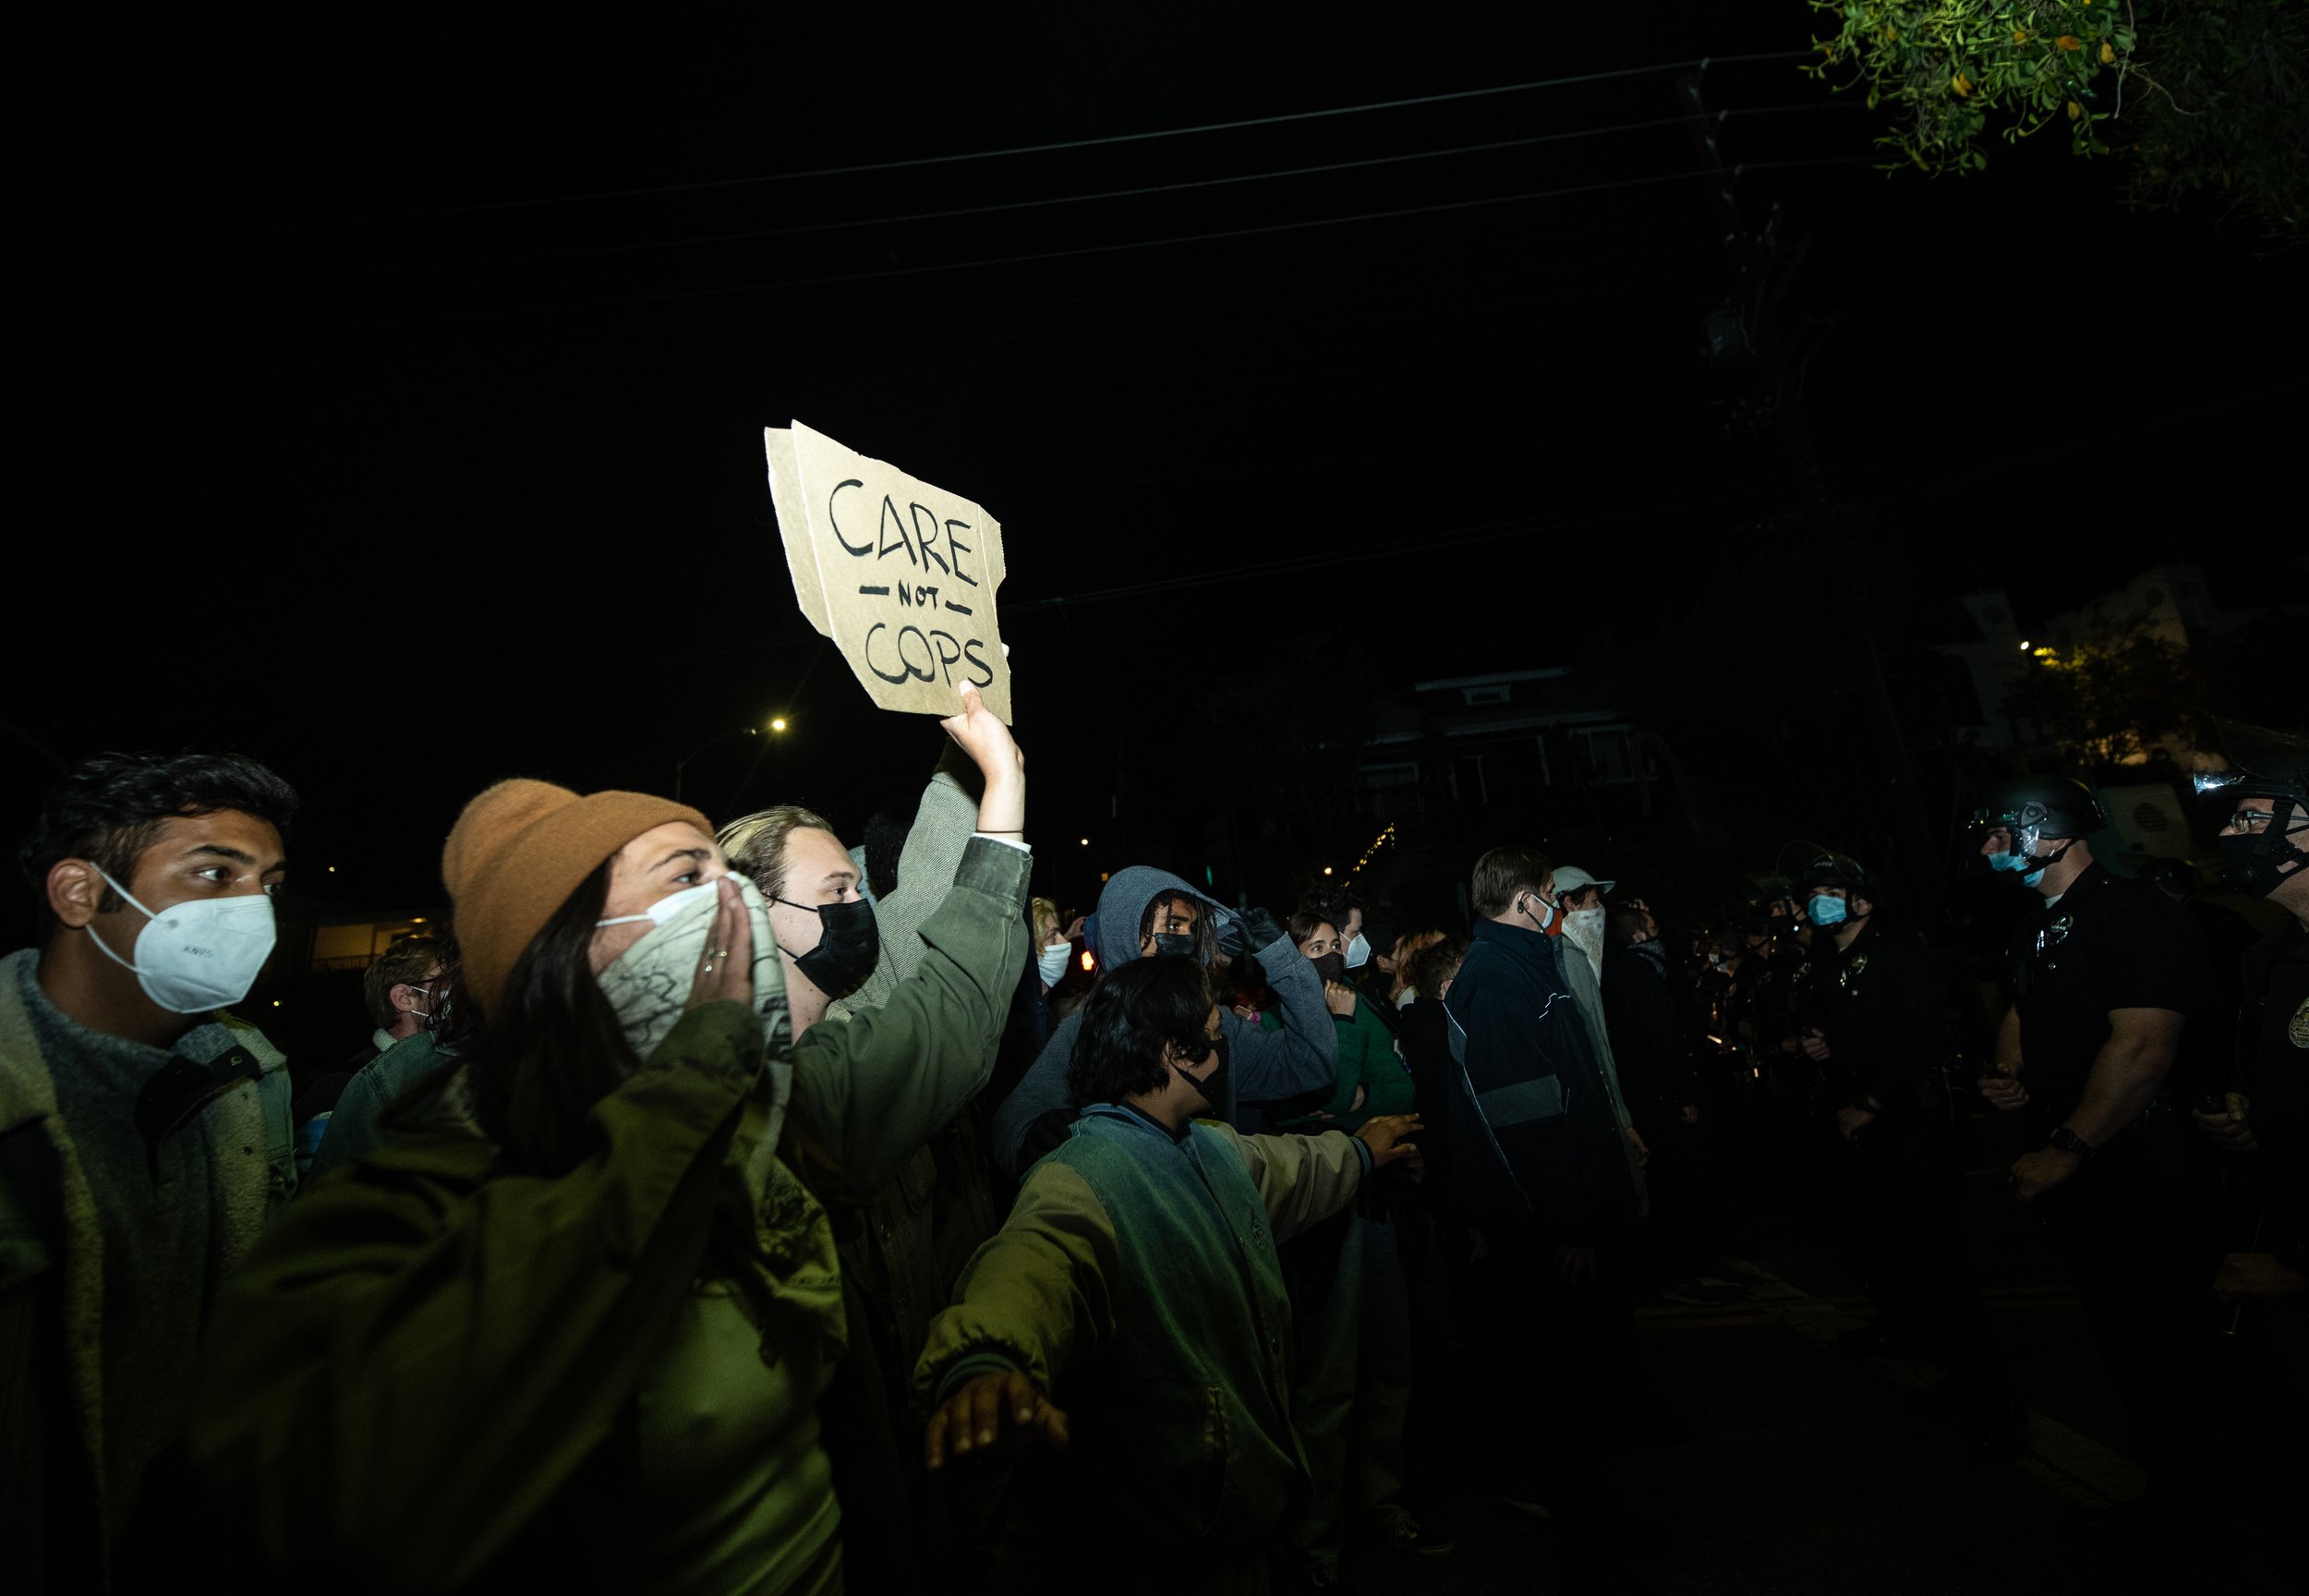  A protester holds up a sign March 24, 2021, near the Los Angeles Police Department skirmish line in an attempt to stop officers from removing an established homeless encampment at Echo Park Lake in the Echo Park neighborhood of Los Angeles. (Photo b